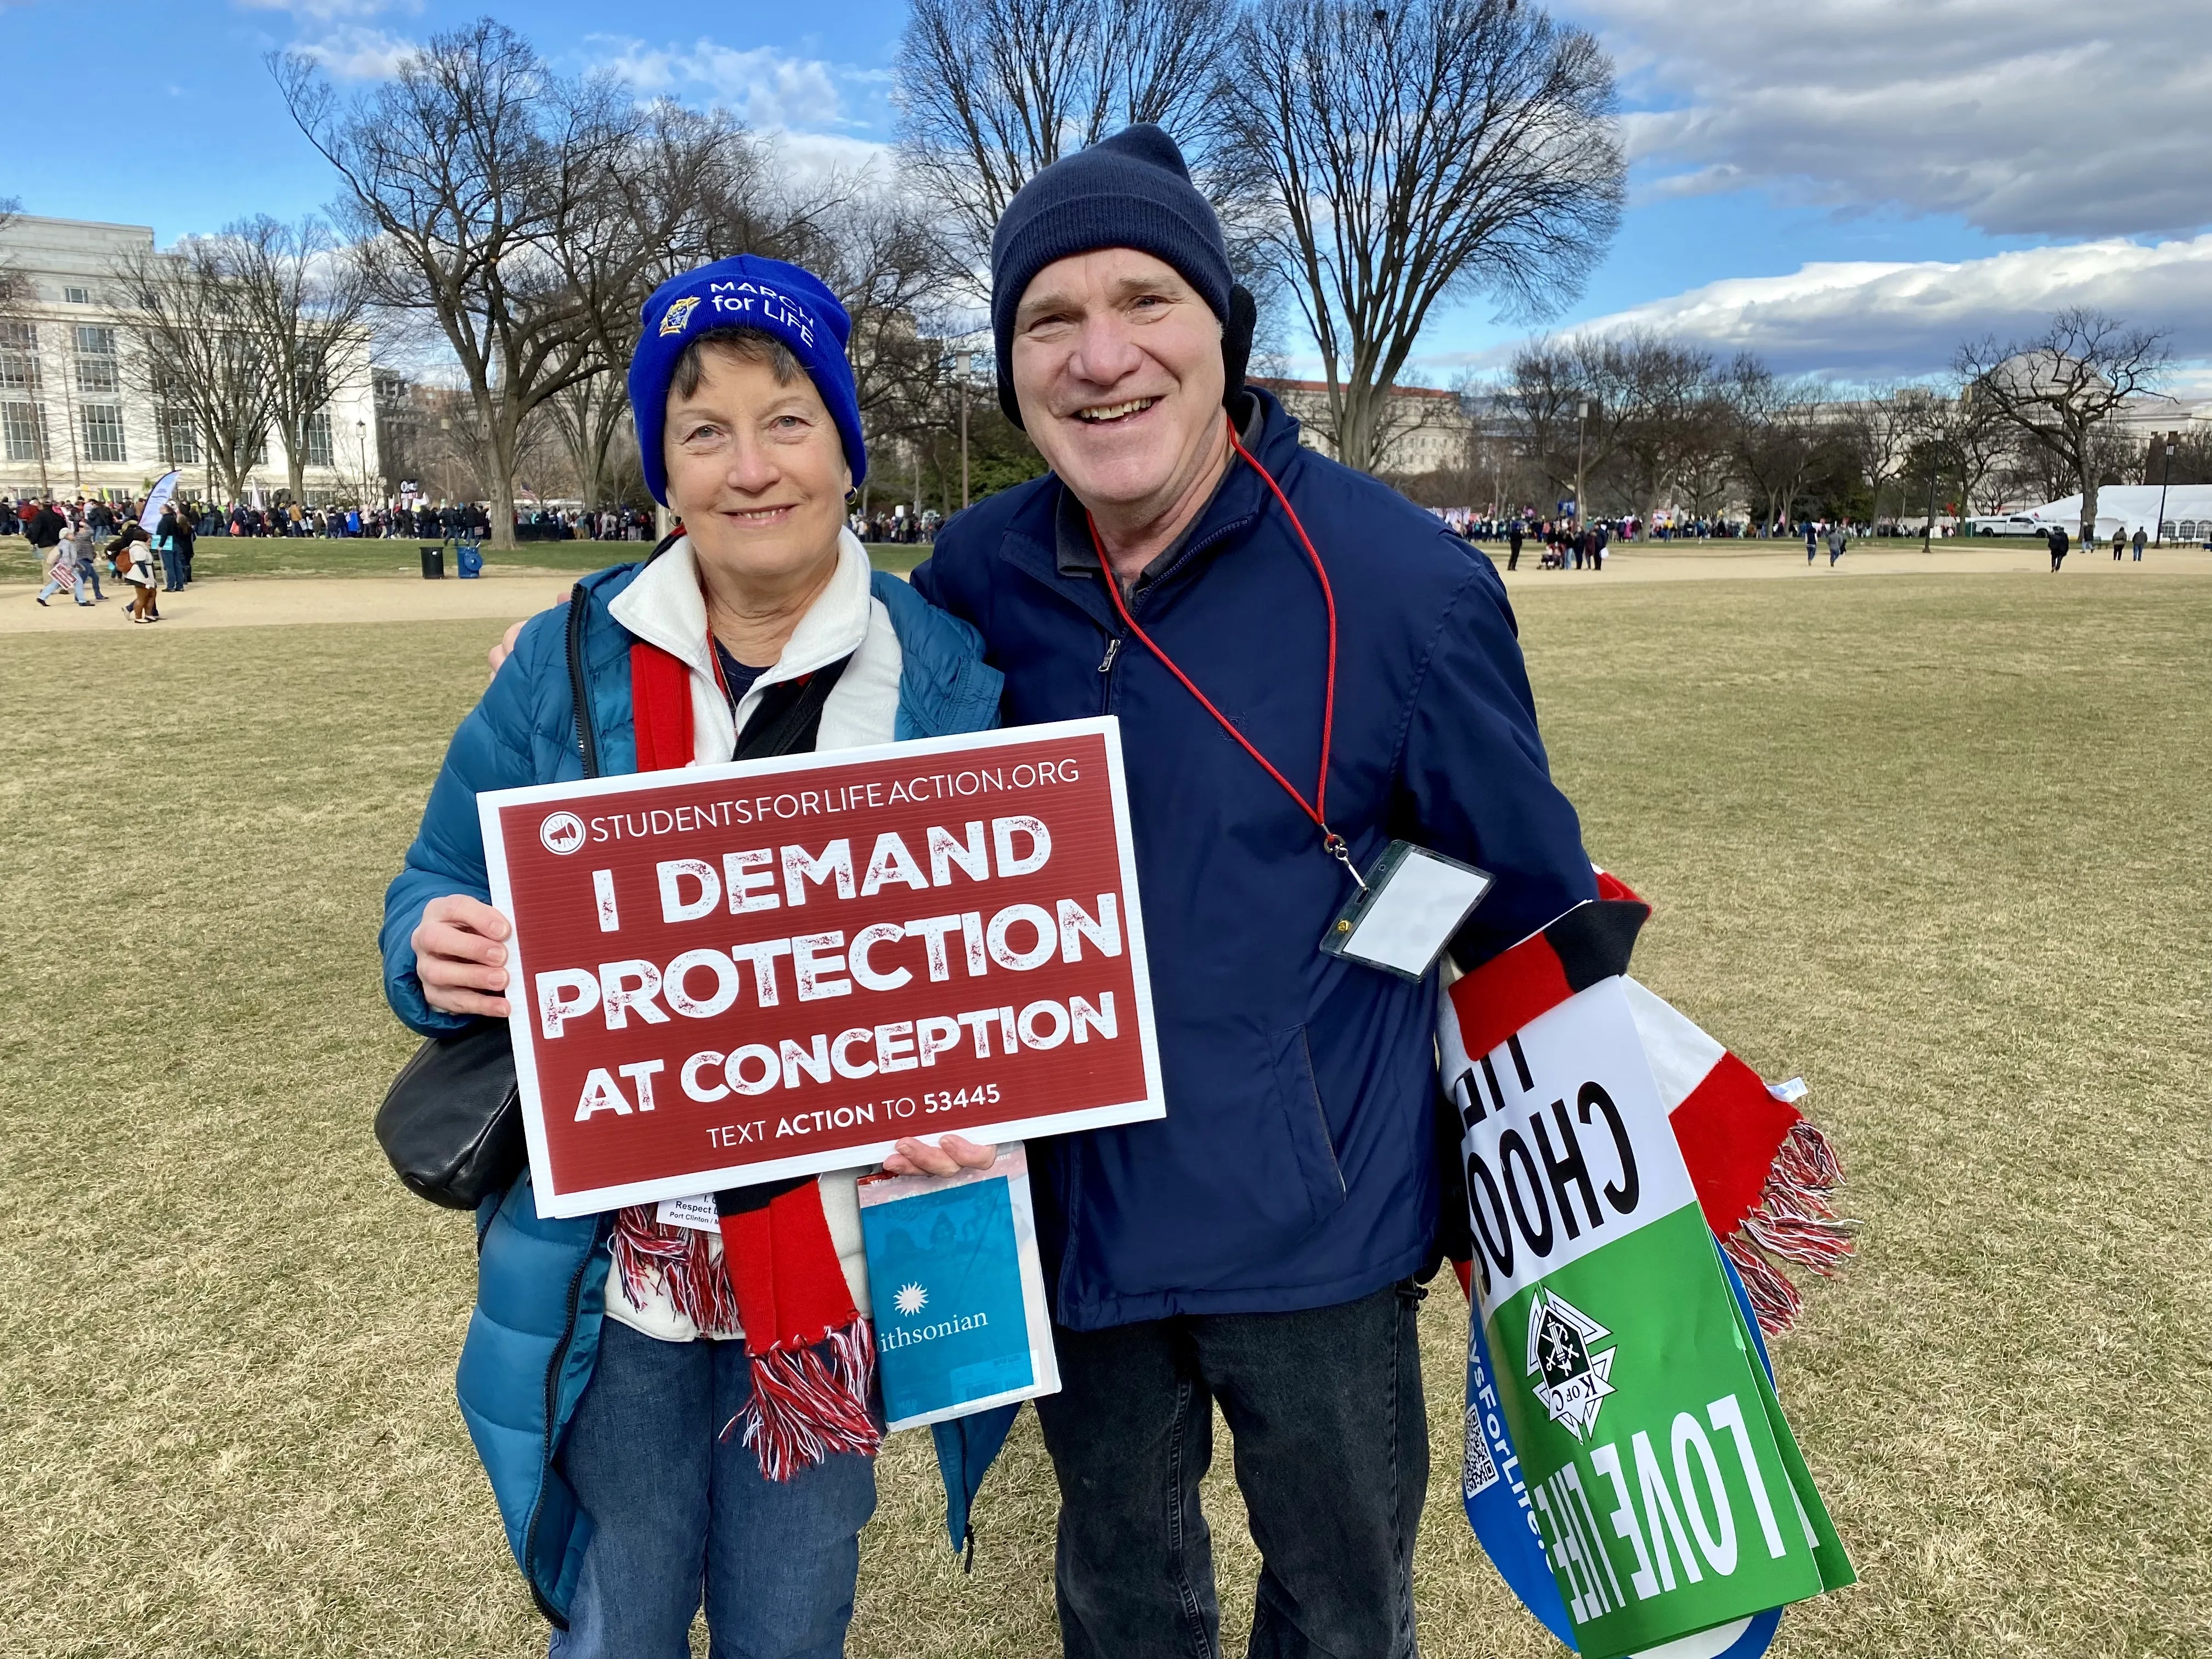 Tom and Mindy Edwards from Sandusky, Ohio, attend the 50th annual March for Life in Washington, D.C., on Jan. 20, 2023.?w=200&h=150